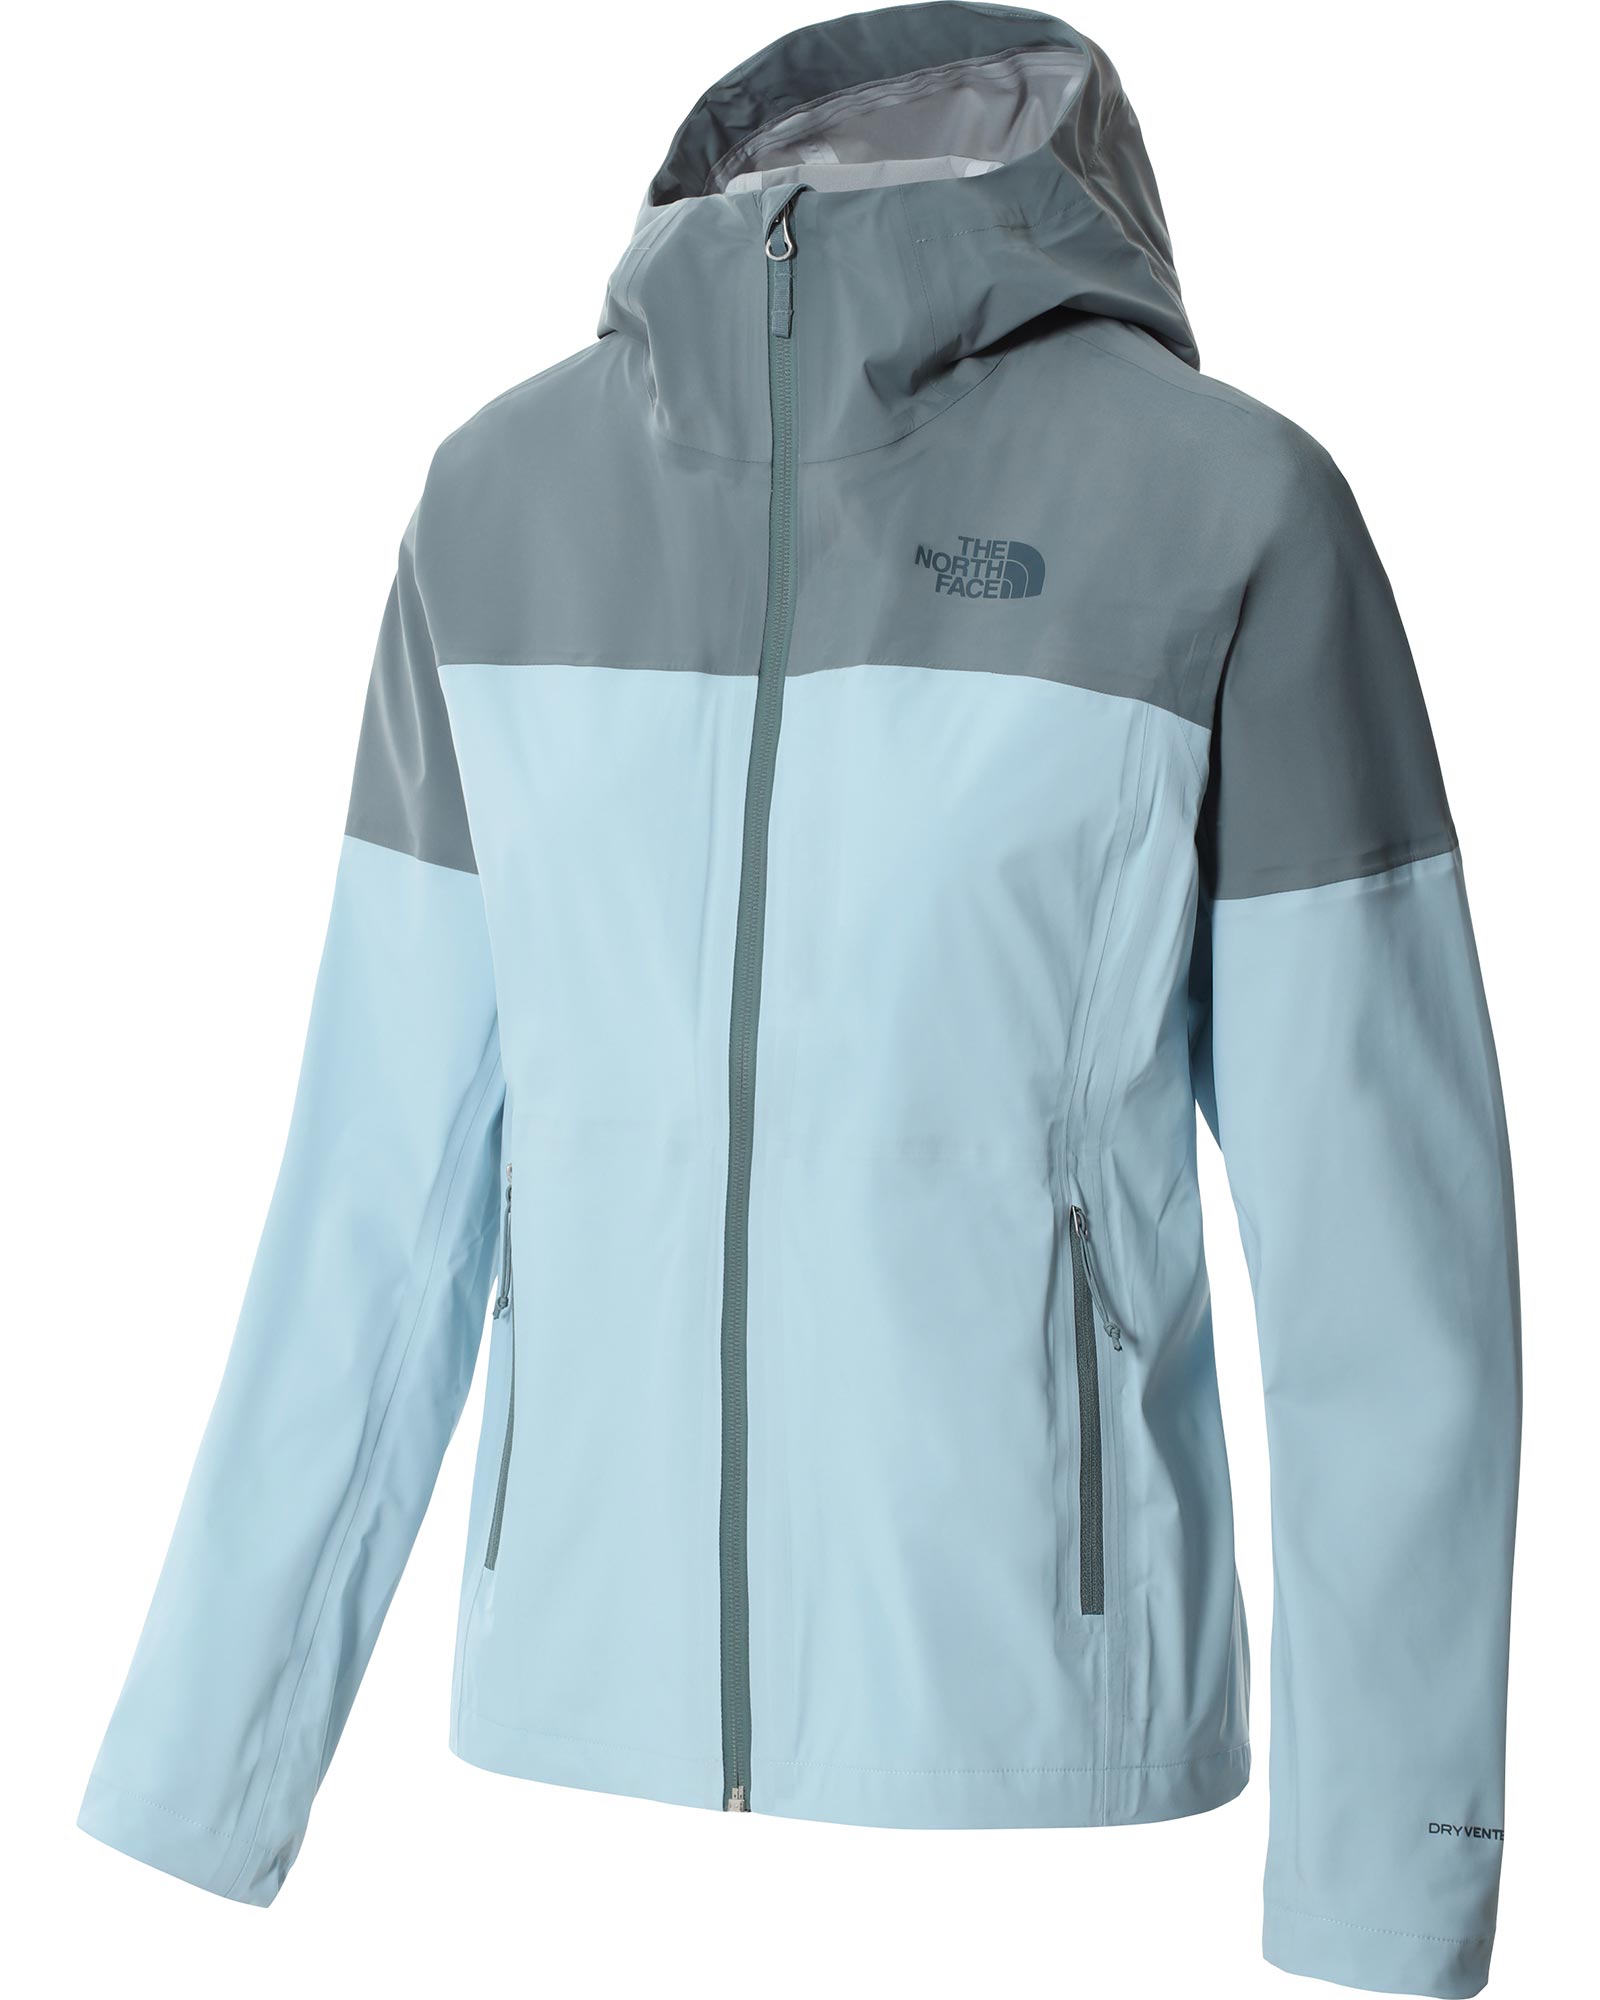 The North Face West Basin DryVent Women’s Jacket - Beta Blue XS